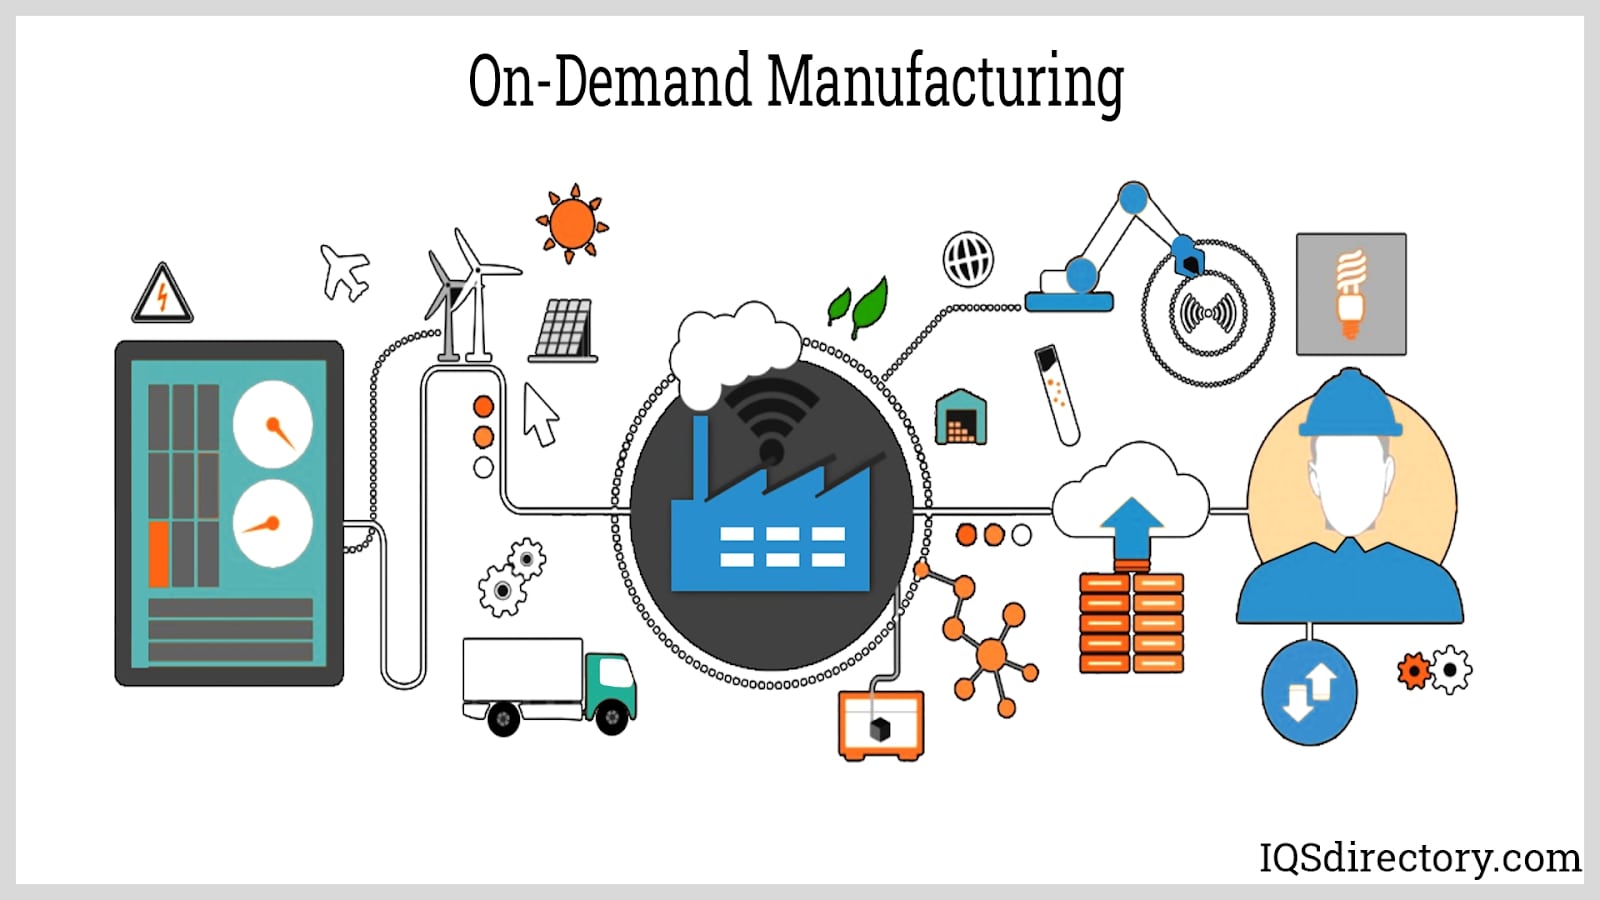 On-Demand Manufacturing